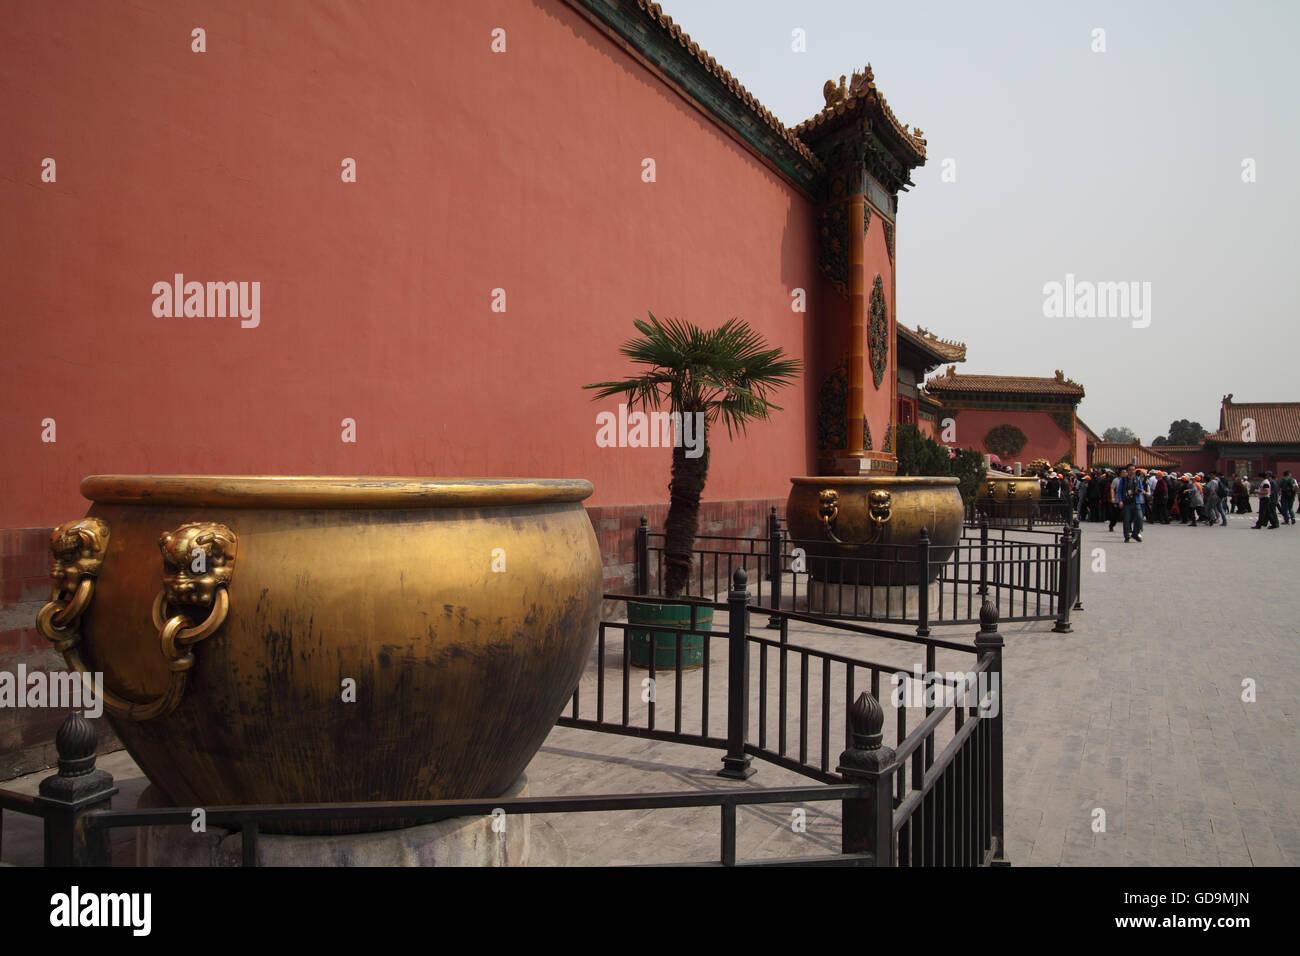 These pots were filled with water to put out fires in the Forbidden City, in winters they were heated so water would not freeze. Beijing, China. Stock Photo